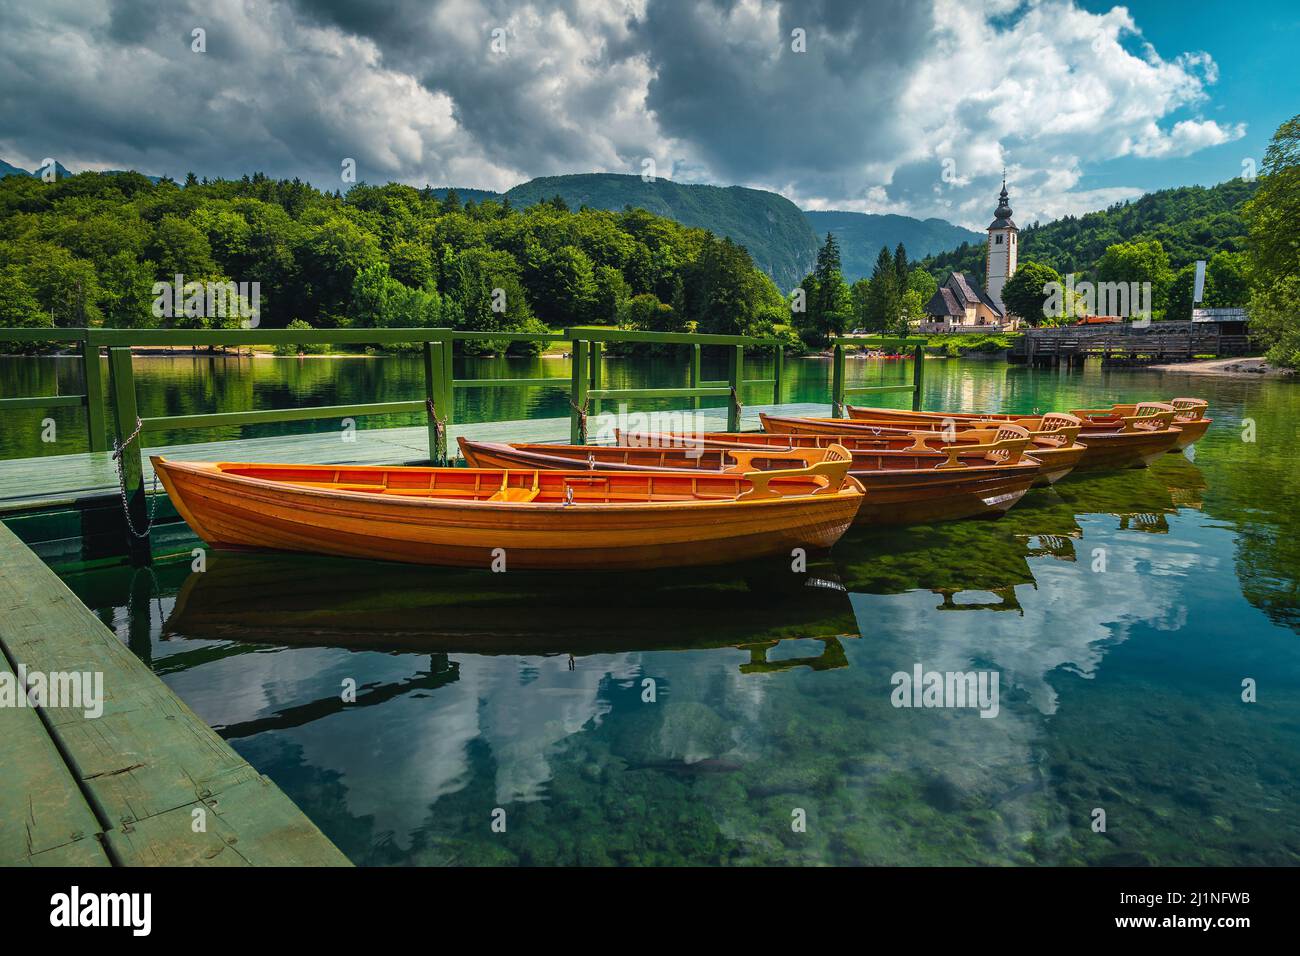 Moored wooden rowing boats on the lake and traditional alpine church in background, lake Bohinj, Ribcev Laz, Slovenia, Europe Stock Photo